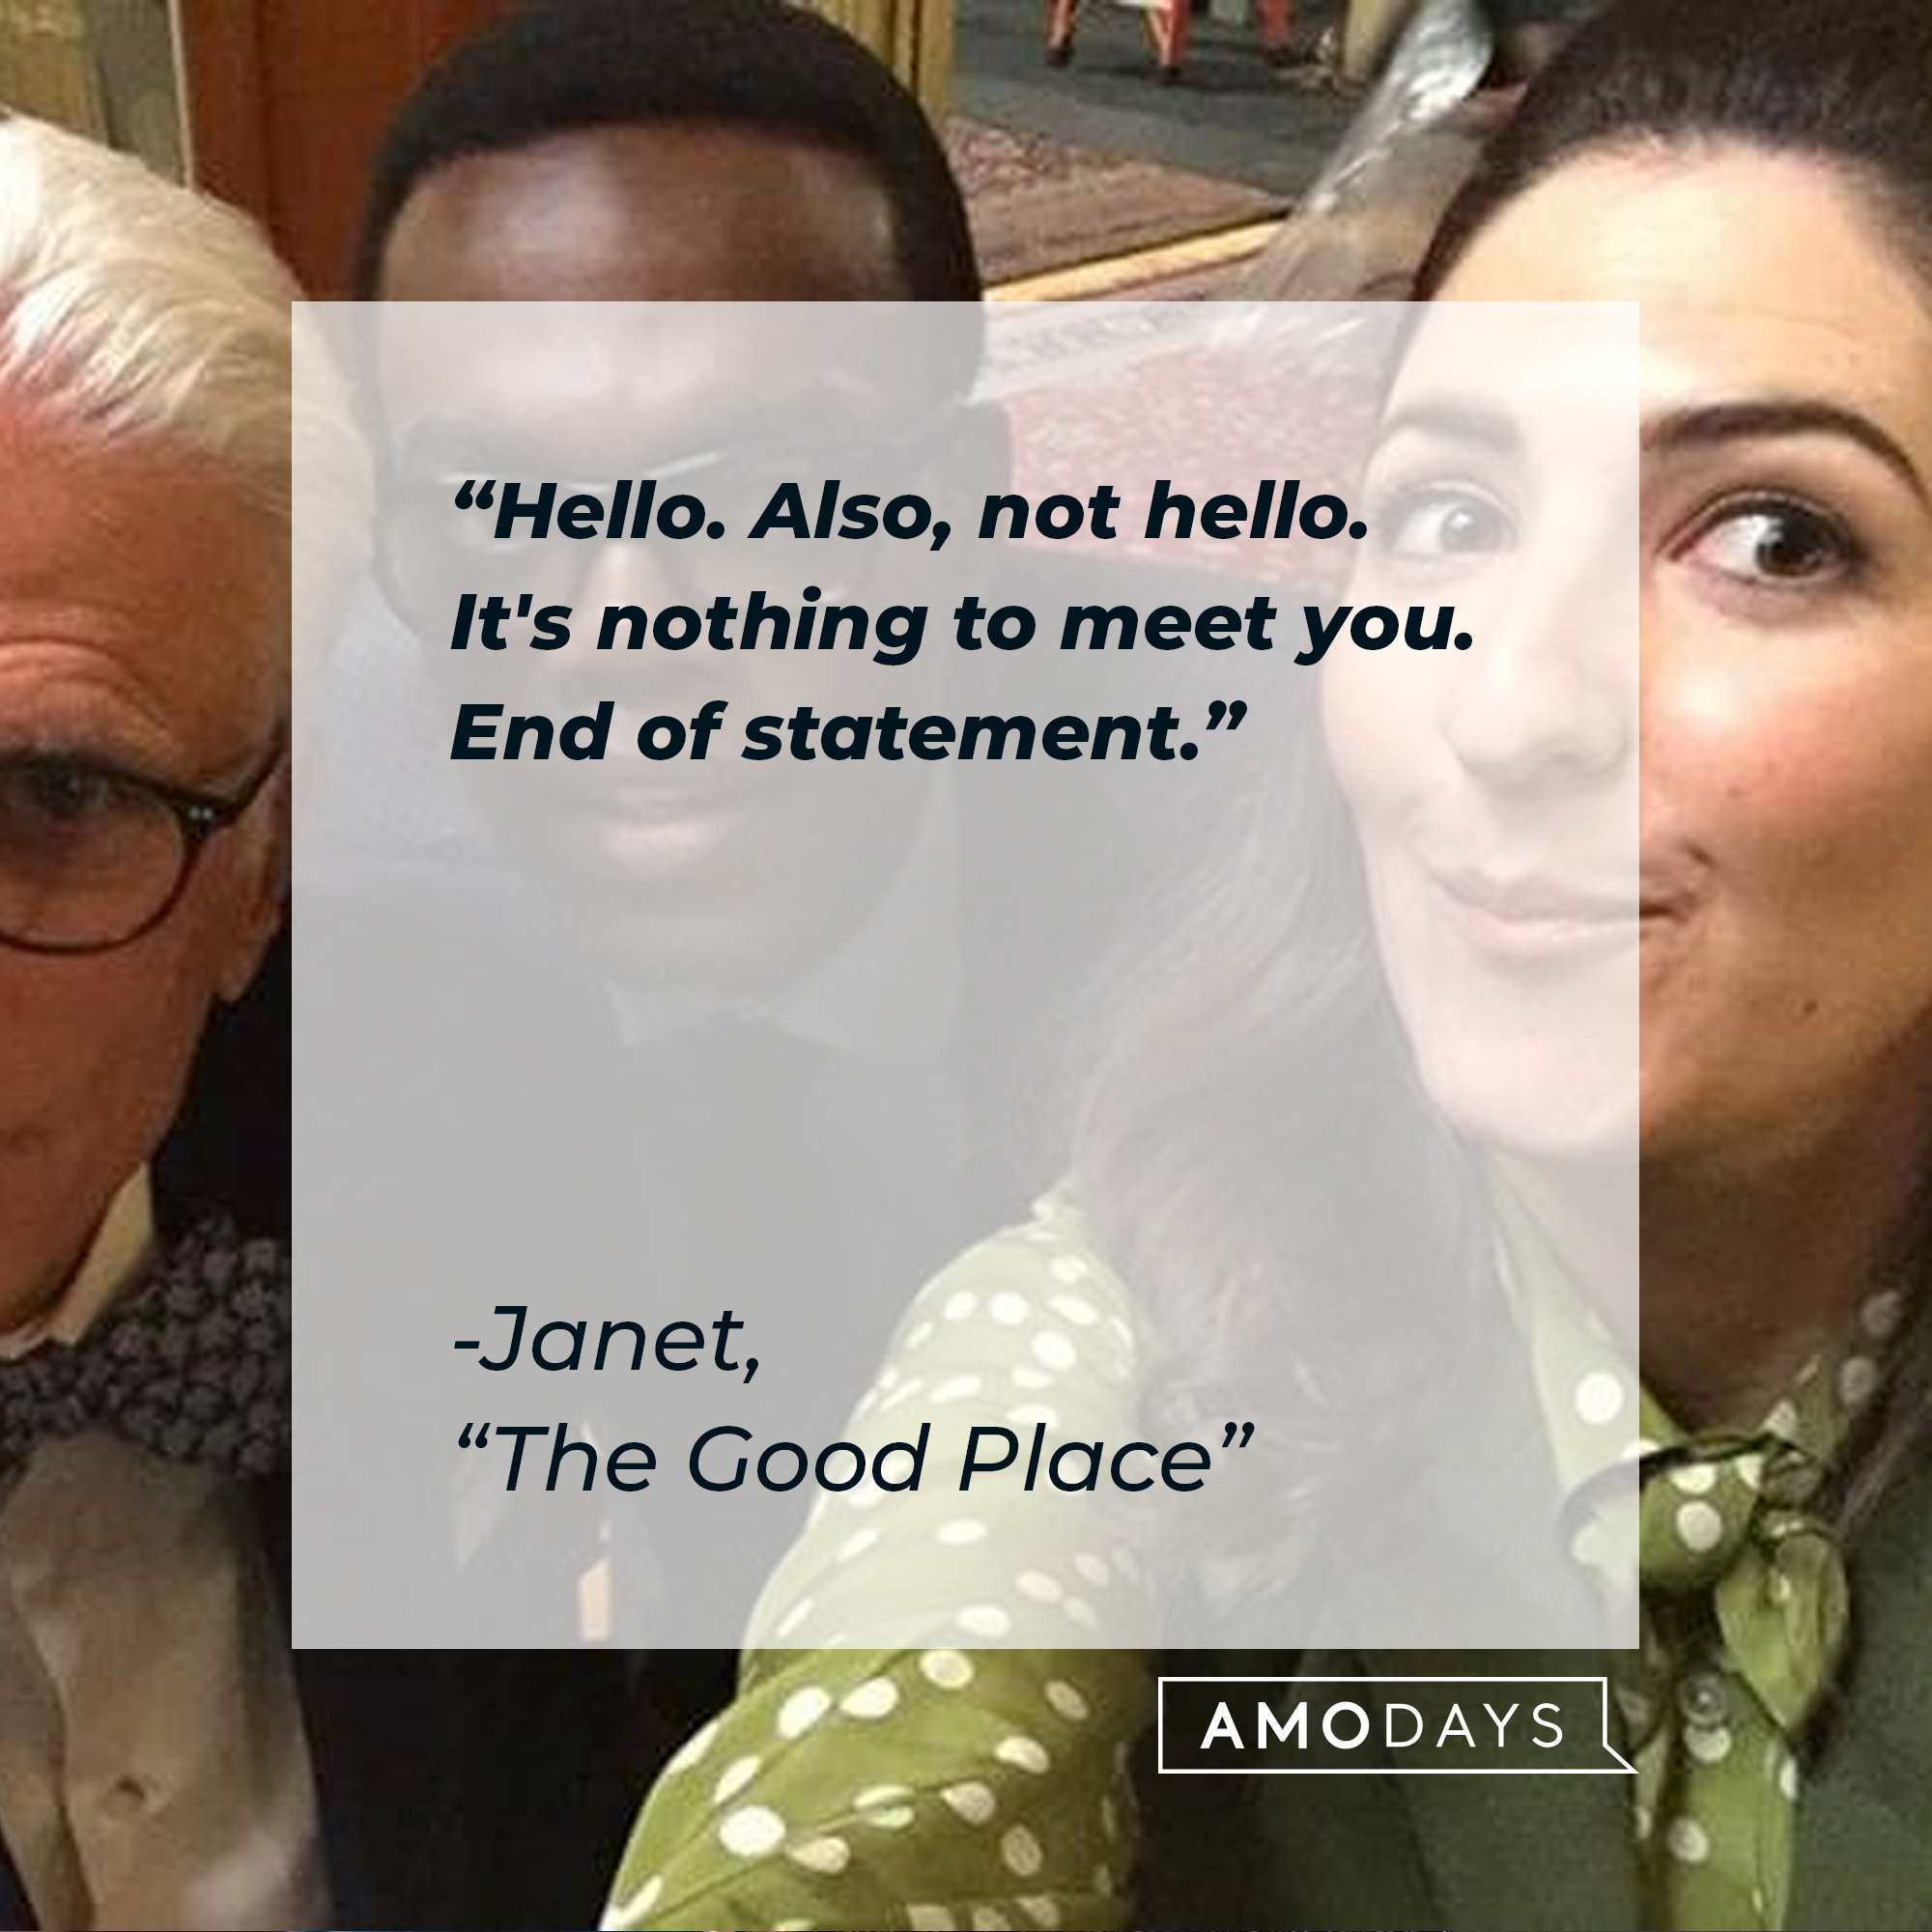 Janet's quote: "Hello. Also, not hello. It's nothing to meet you. End of statement." | Source: facebook.com/NBCTheGoodPlace